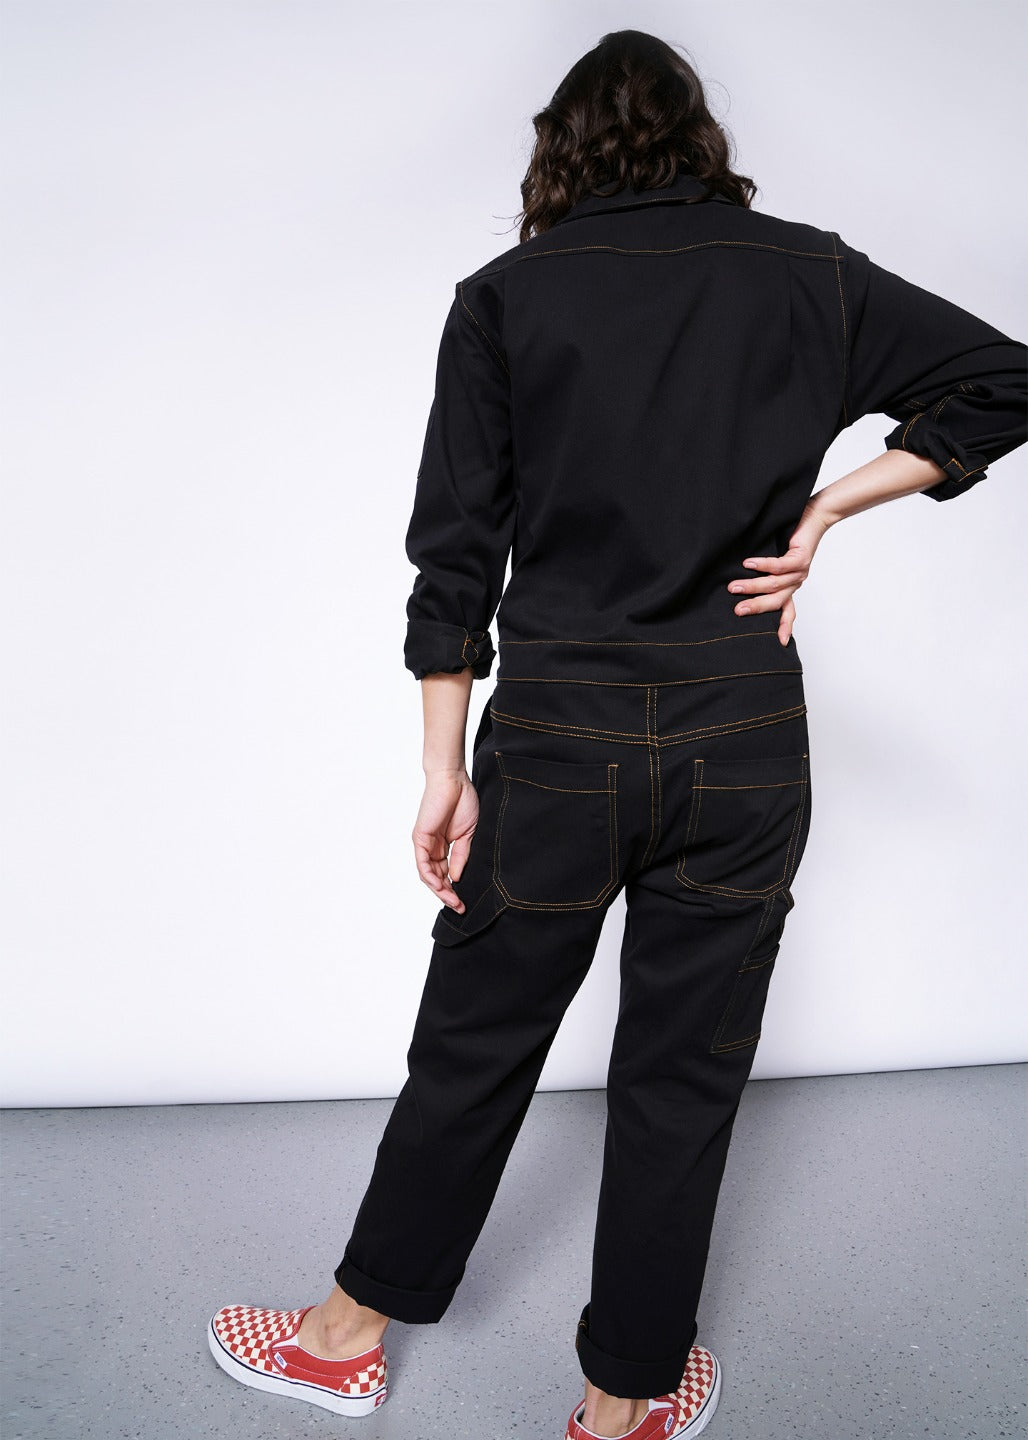 Back view of model wearing size small black coverall with orange pop stitch detailing, showing two butt pockets, one side pocket, and hammer loop